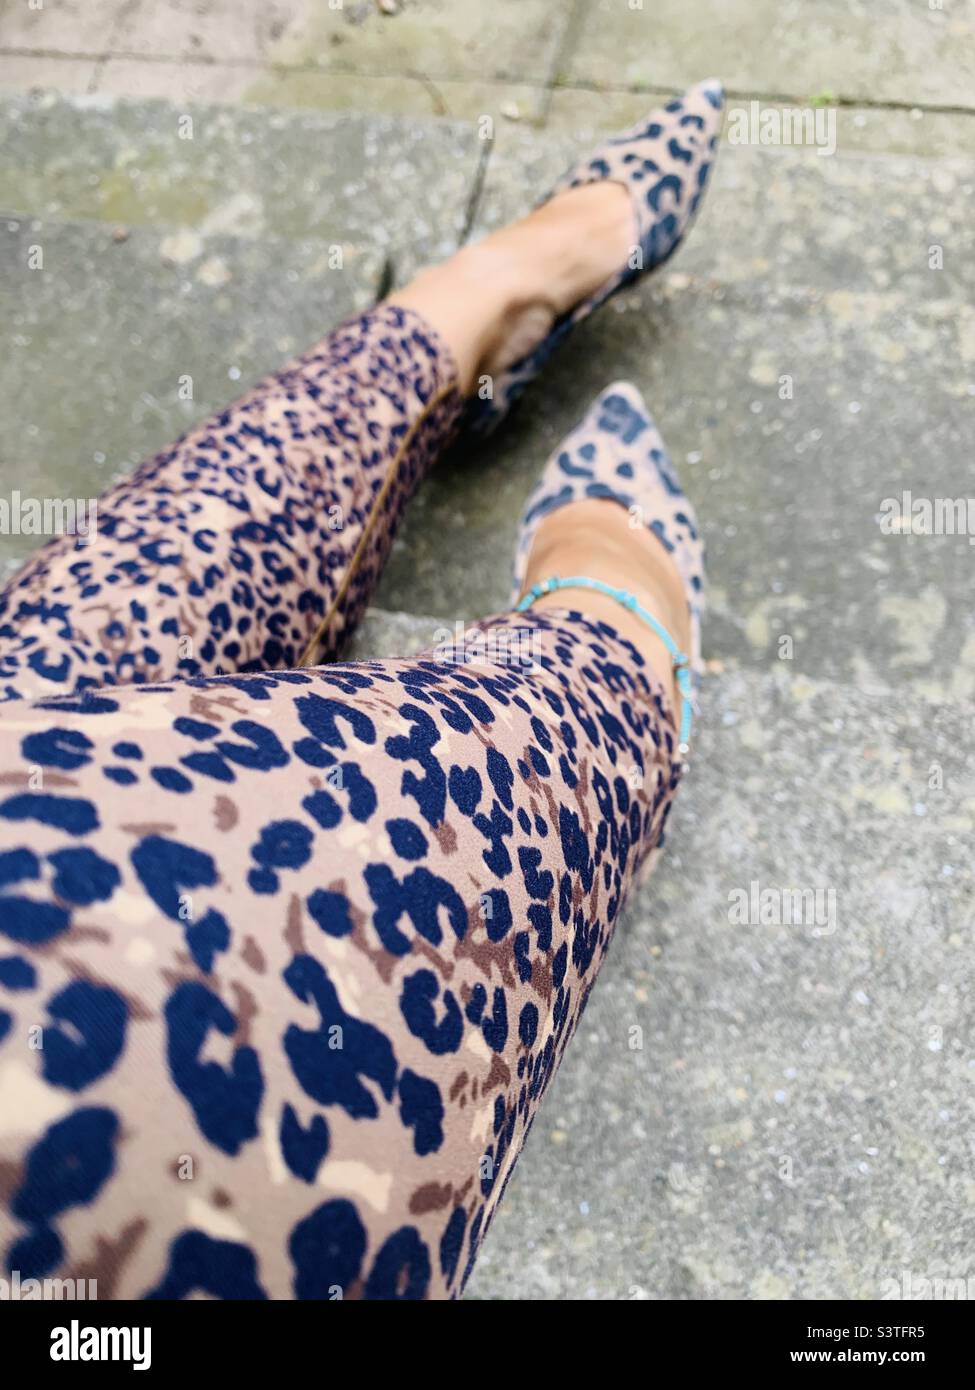 Woman wearing leopard print leggings and shoes Stock Photo